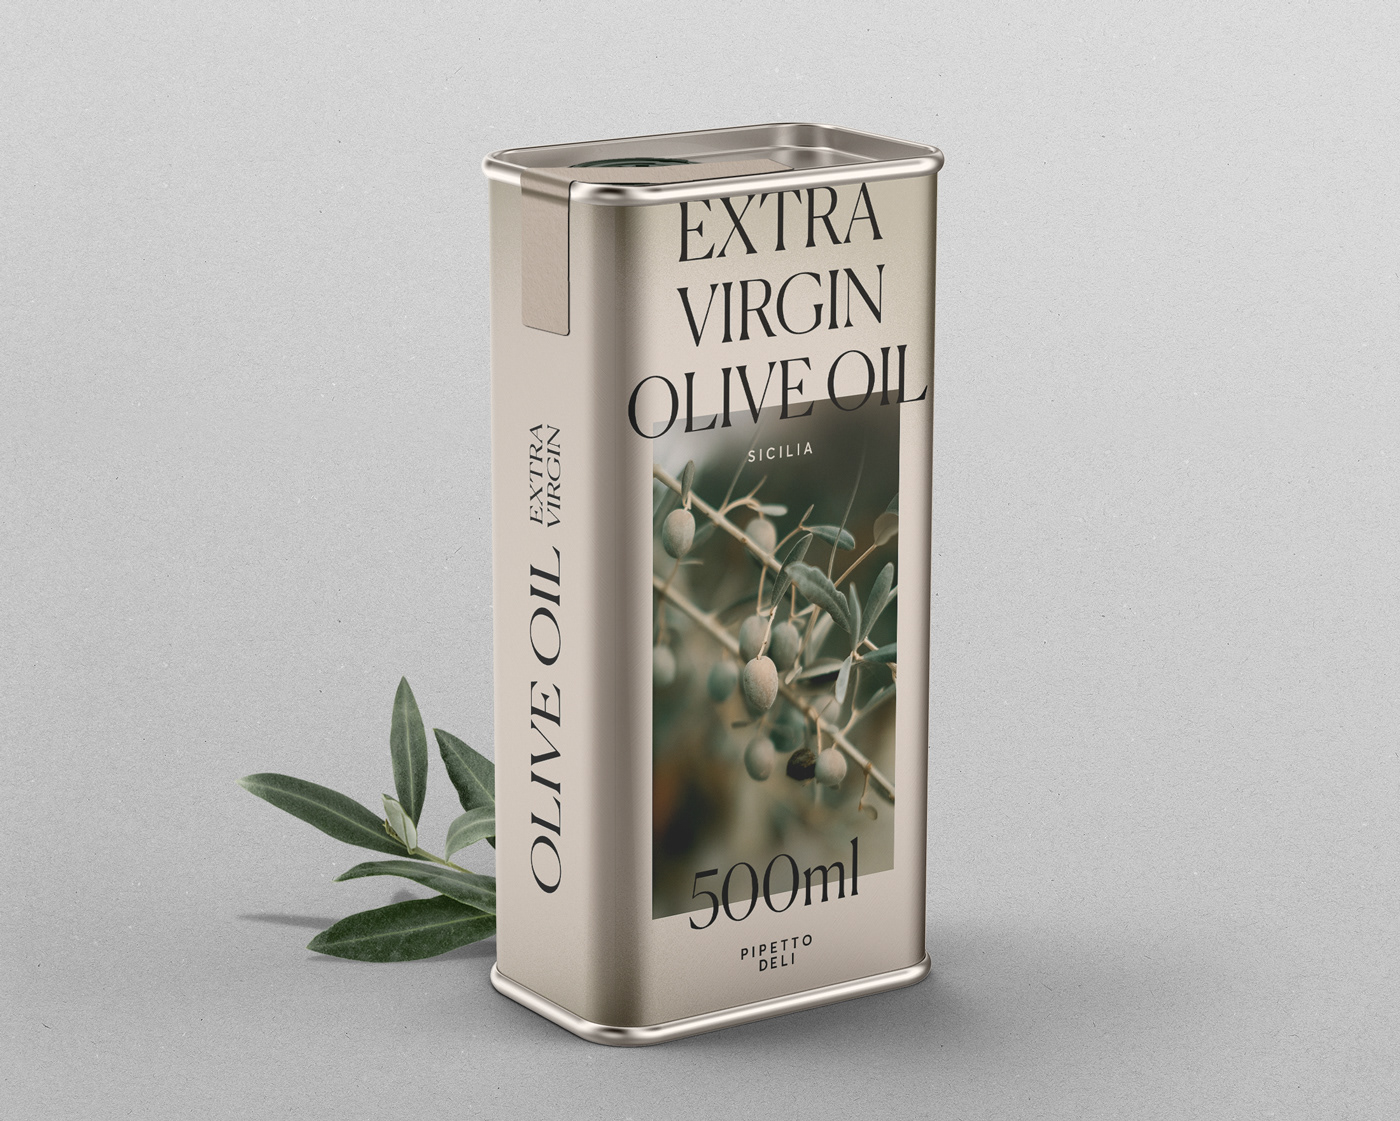 Packaging for an olive oil